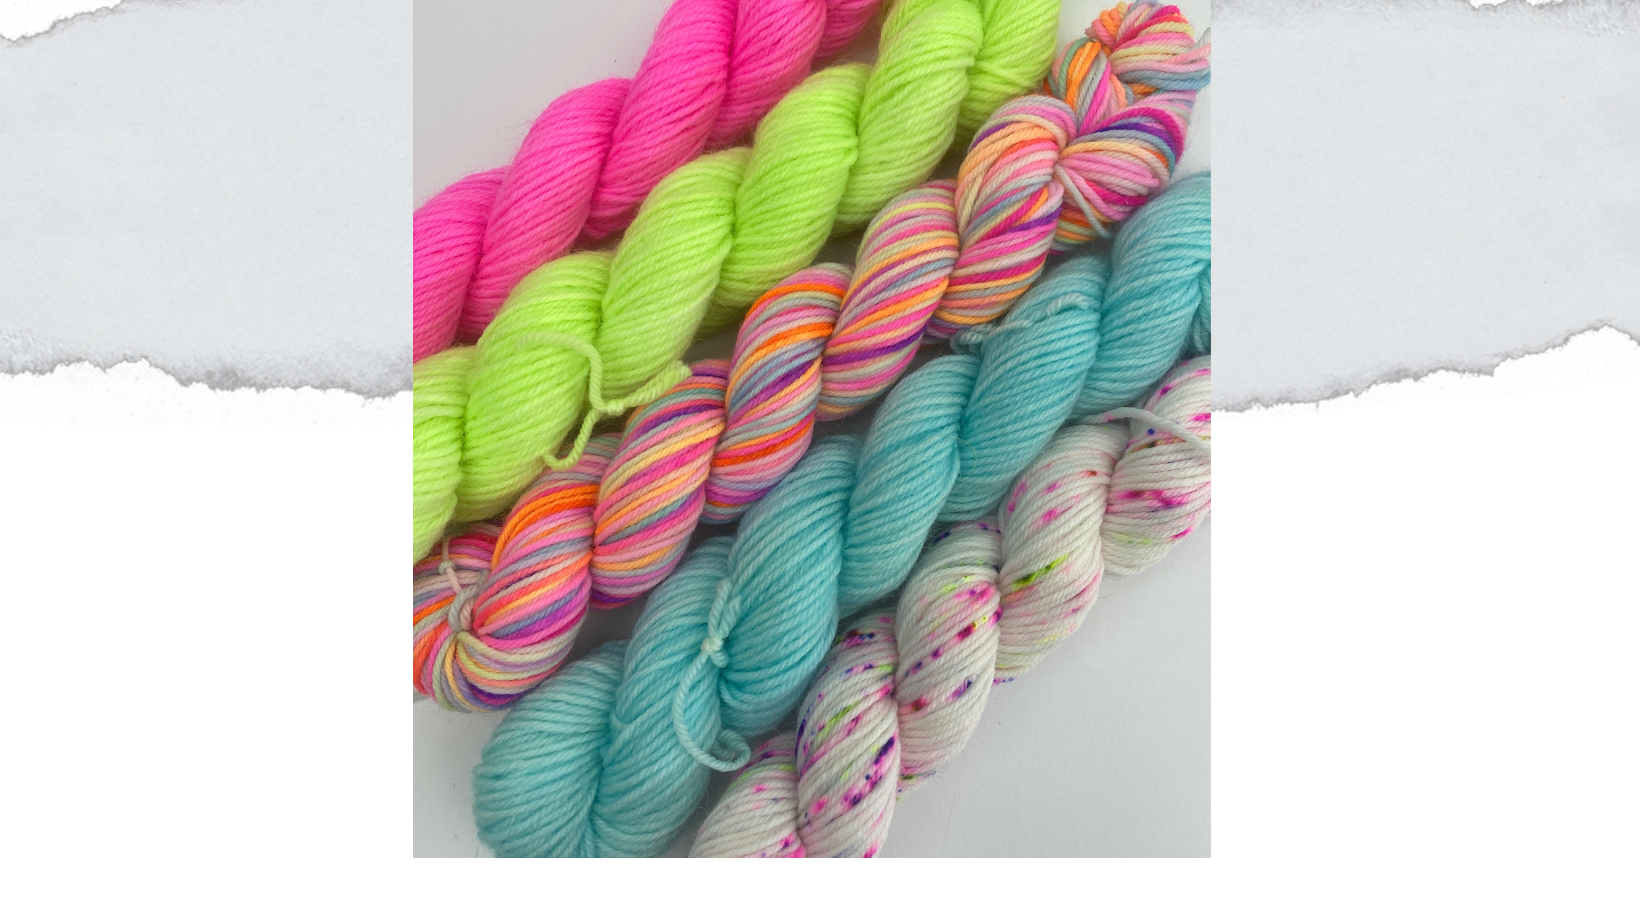 Hand dyed yarn mini skeins before they are wound into a ball and ready to use